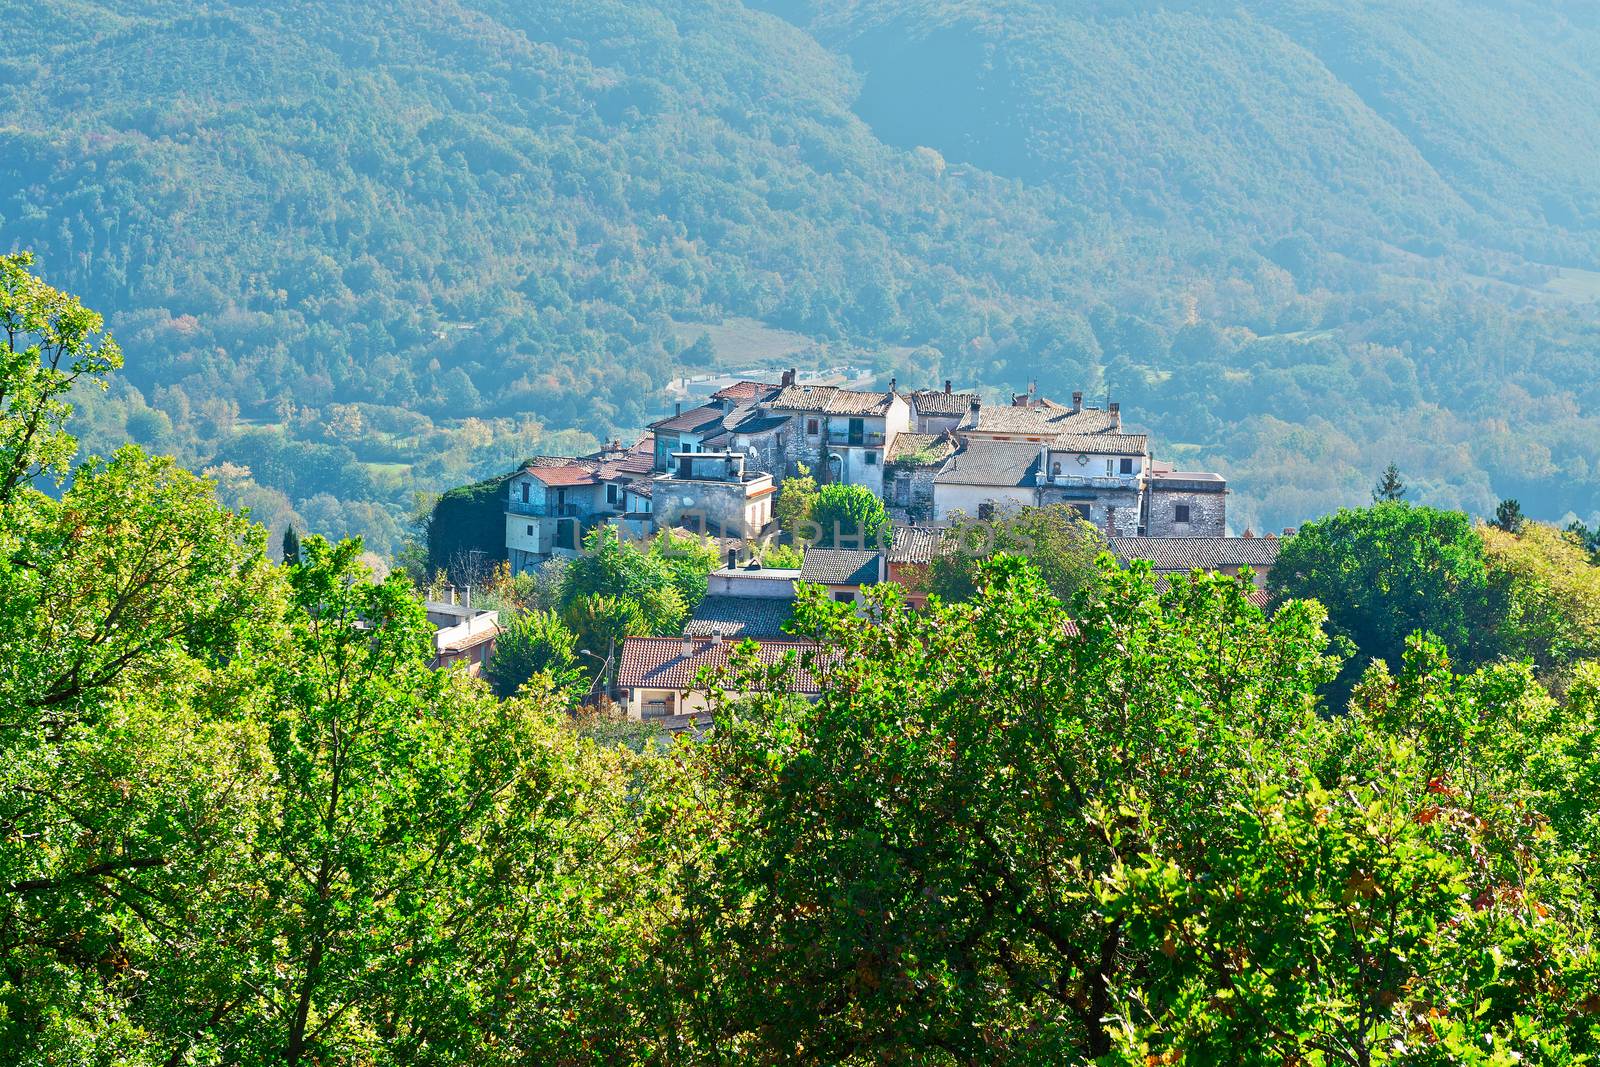 Medieval Italian City on a Hilltop Surrounded by Mountains Covered with Forests